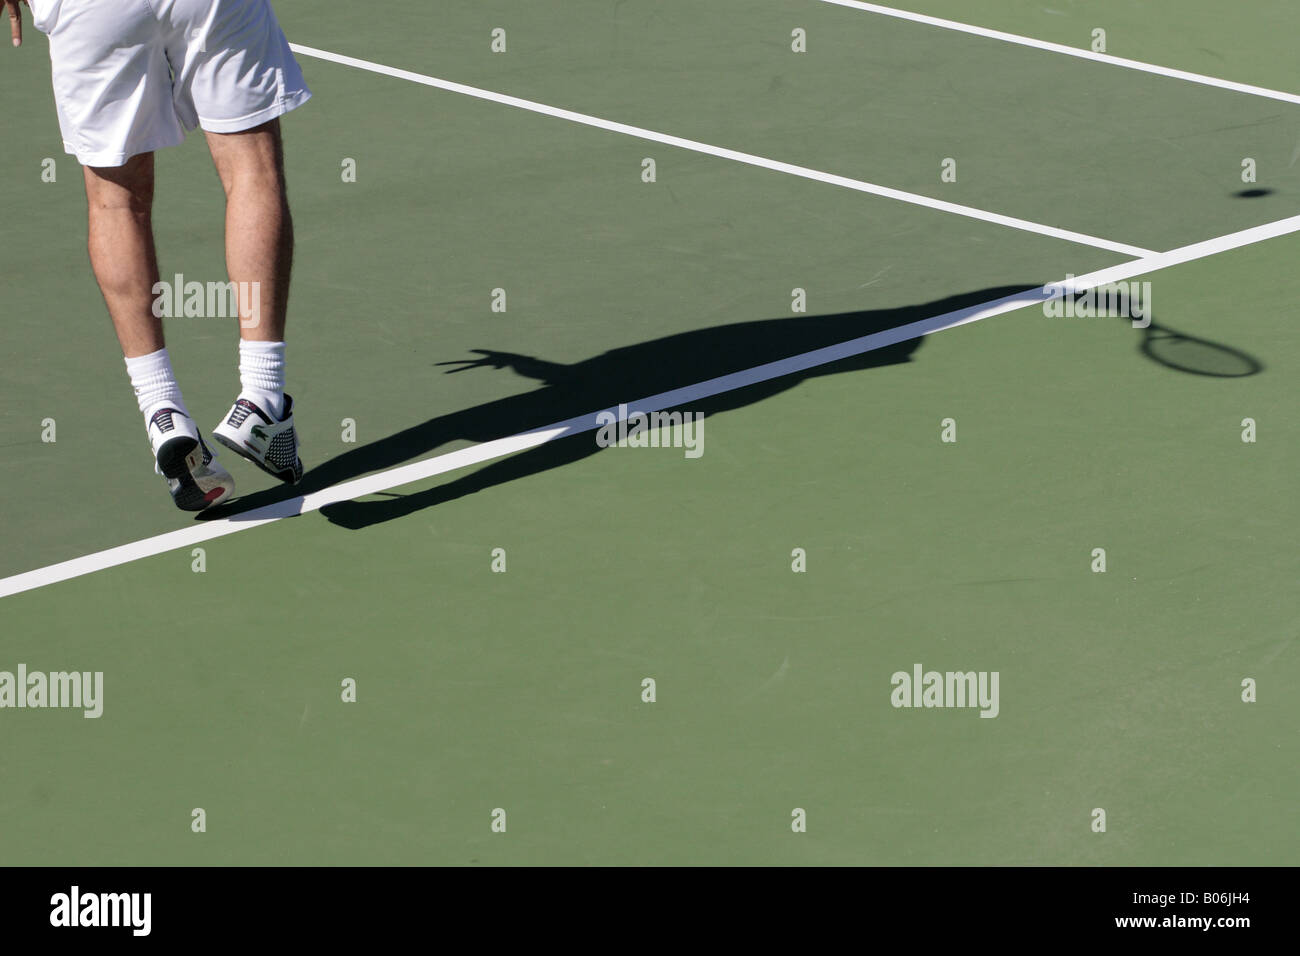 Shadow thrown by Albert Costa as he serves during the final of the Tenerife Senior cup at Abama Stock Photo